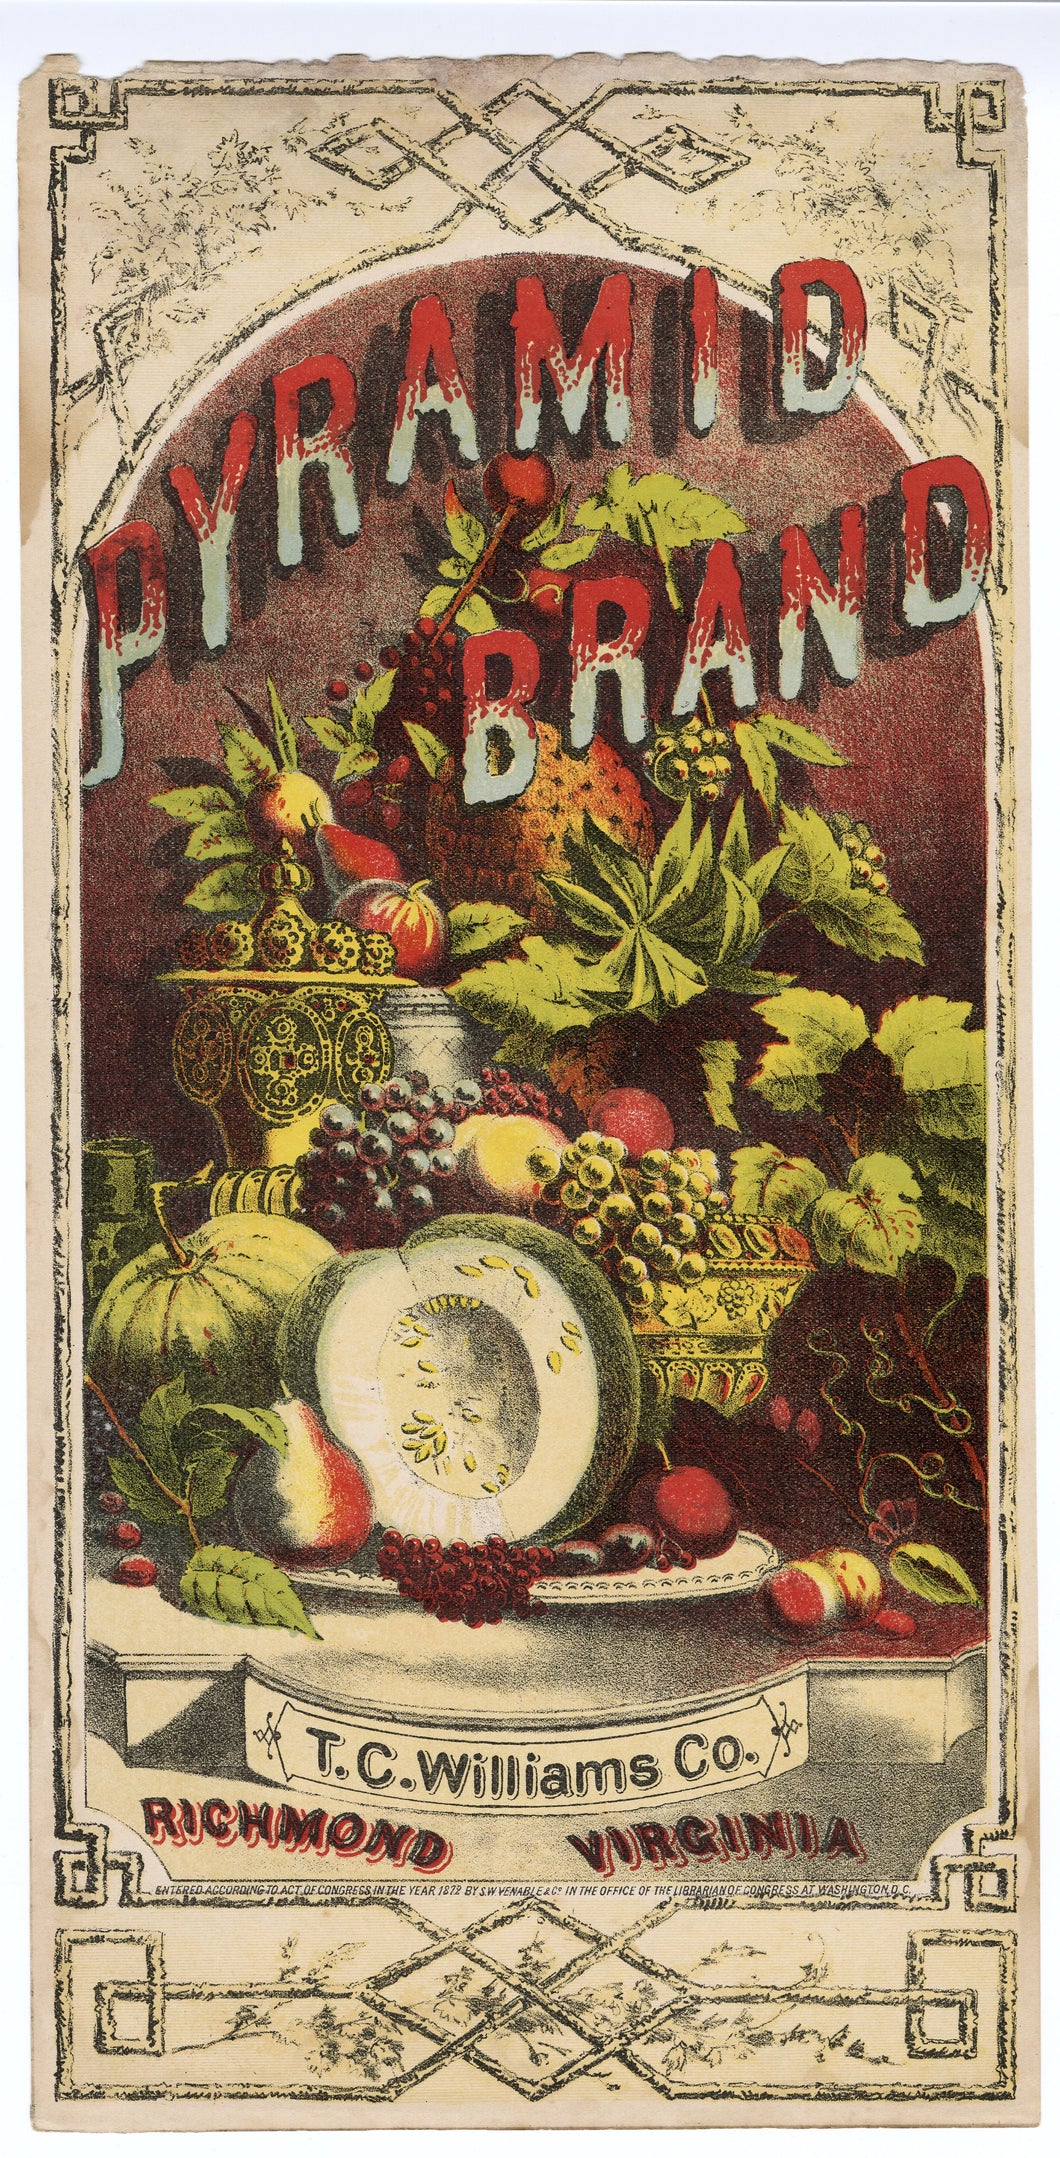 PYRAMID BRAND Caddy Label || T.C. Williams Co., Old, Vintage, Fruits